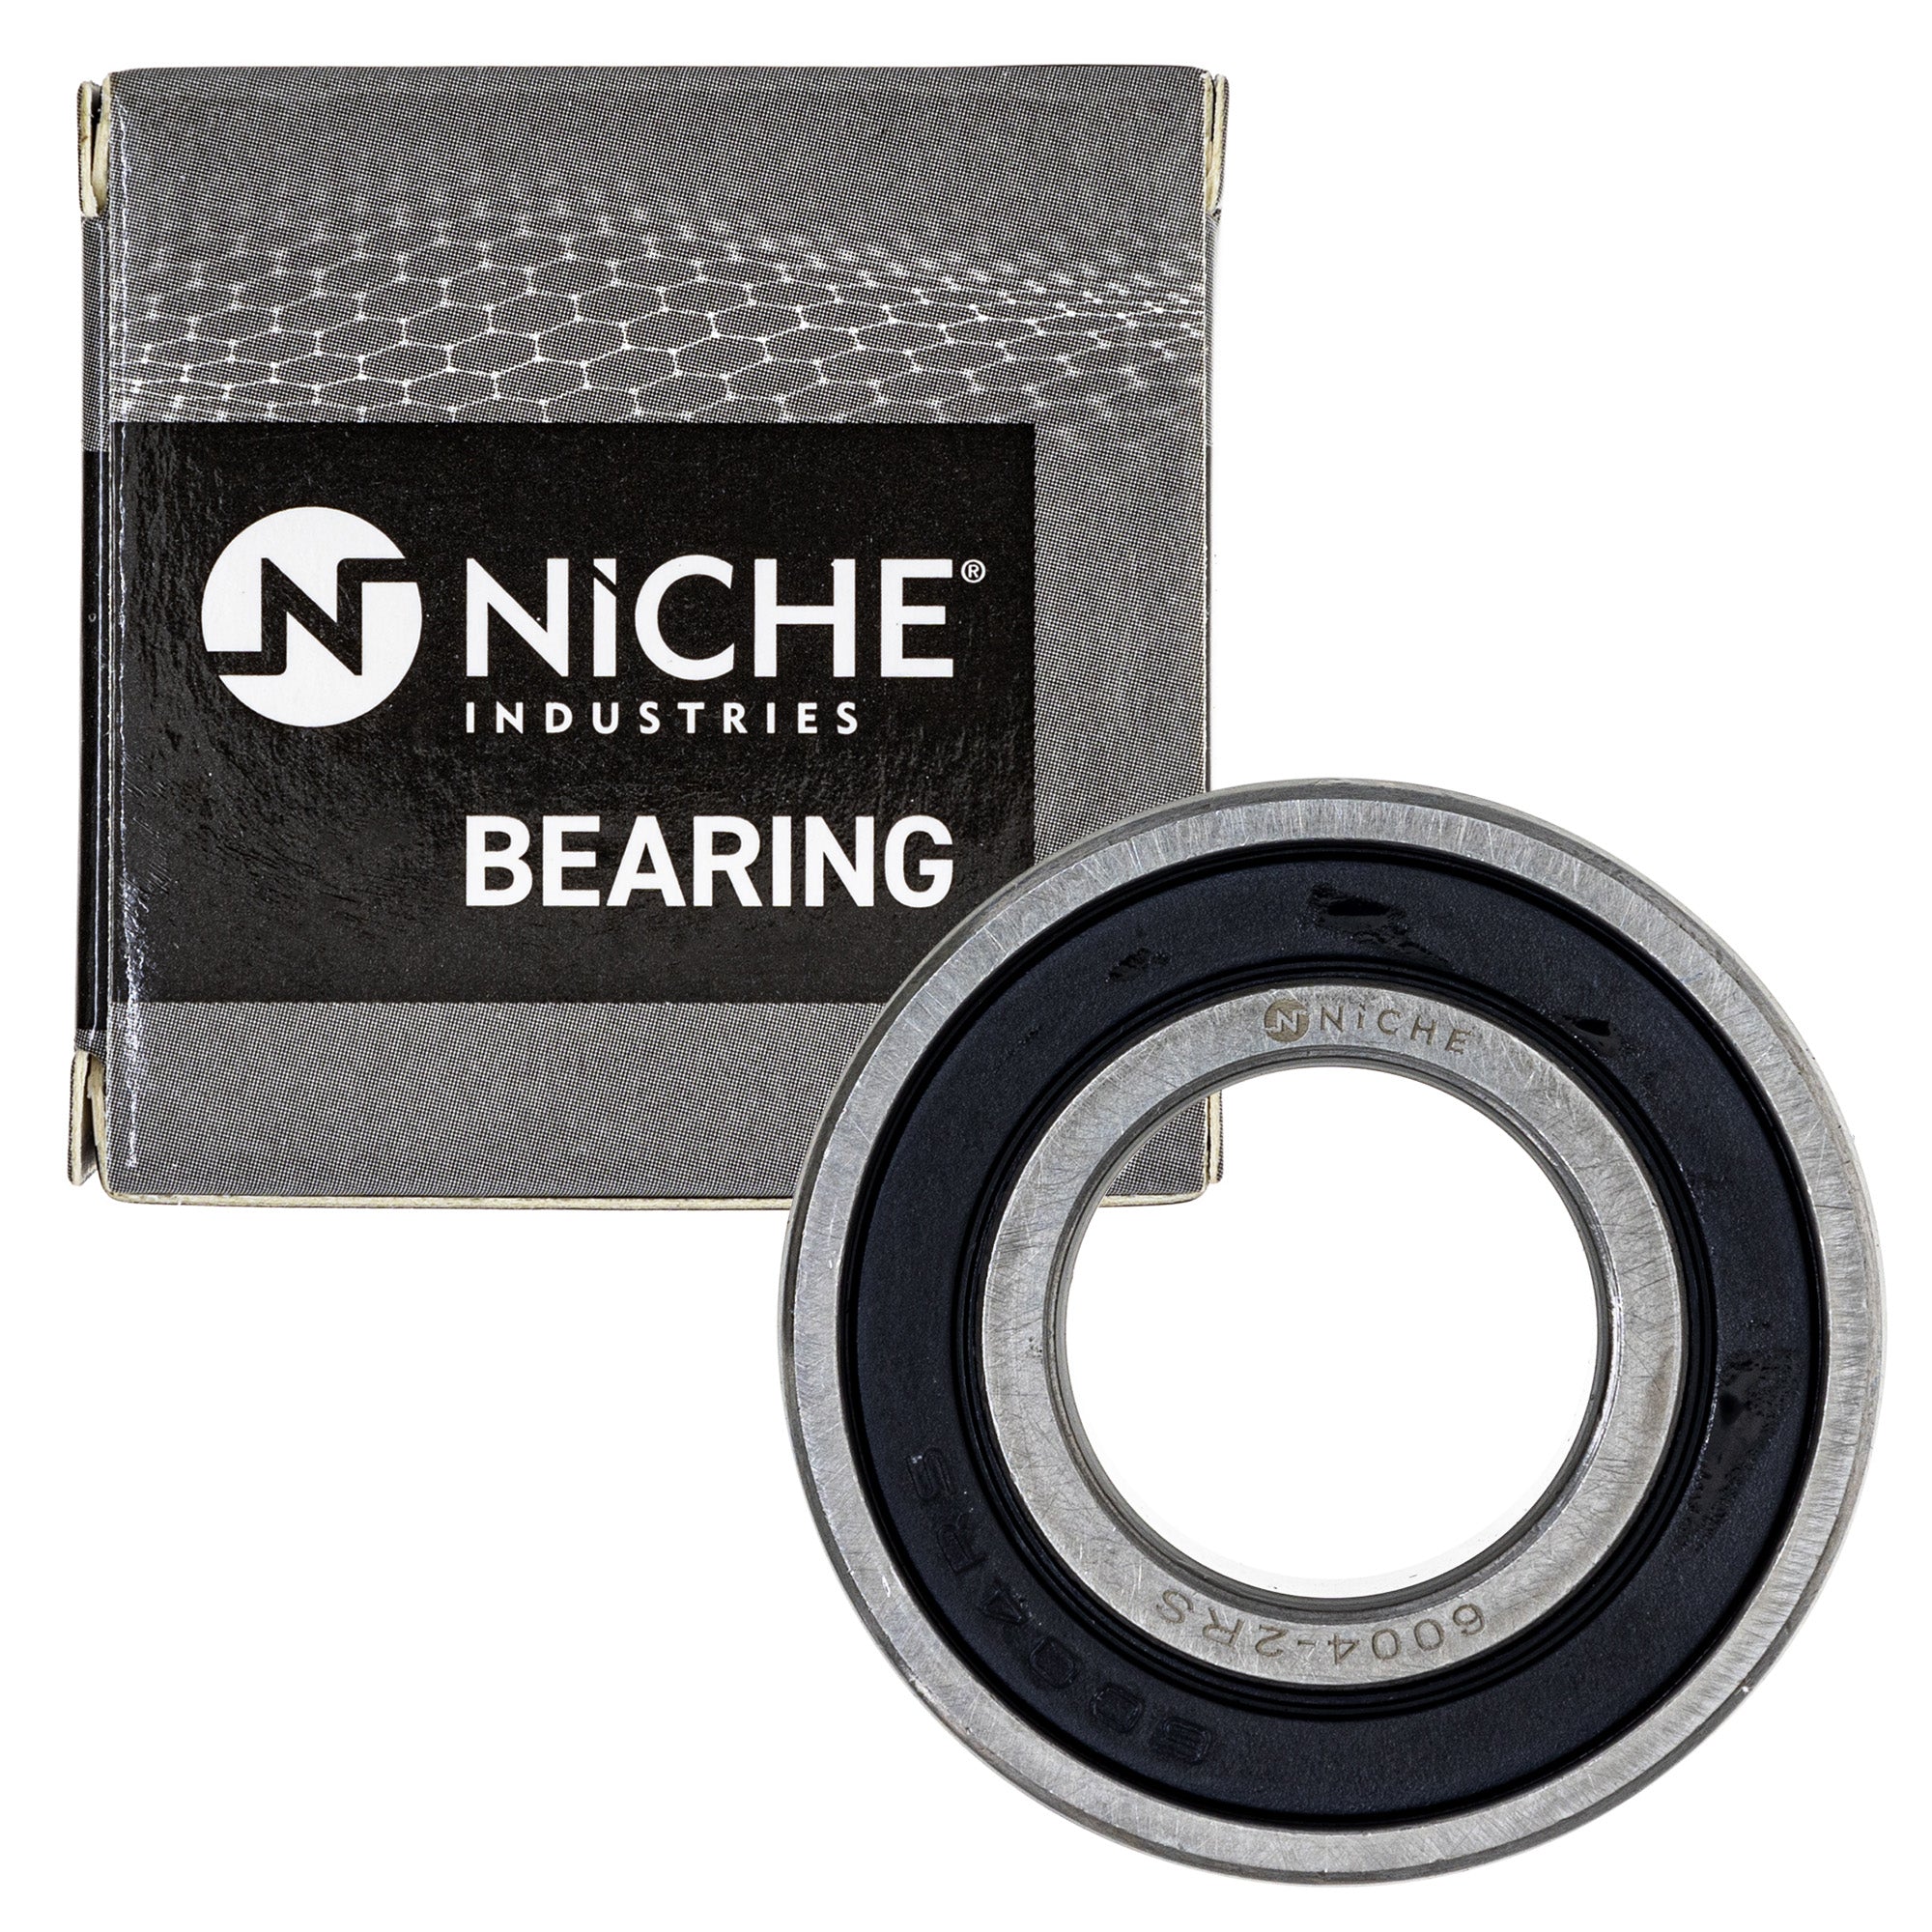 NICHE MK1009126 Wheel Bearing Seal Kit for zOTHER Ref No ZZR600